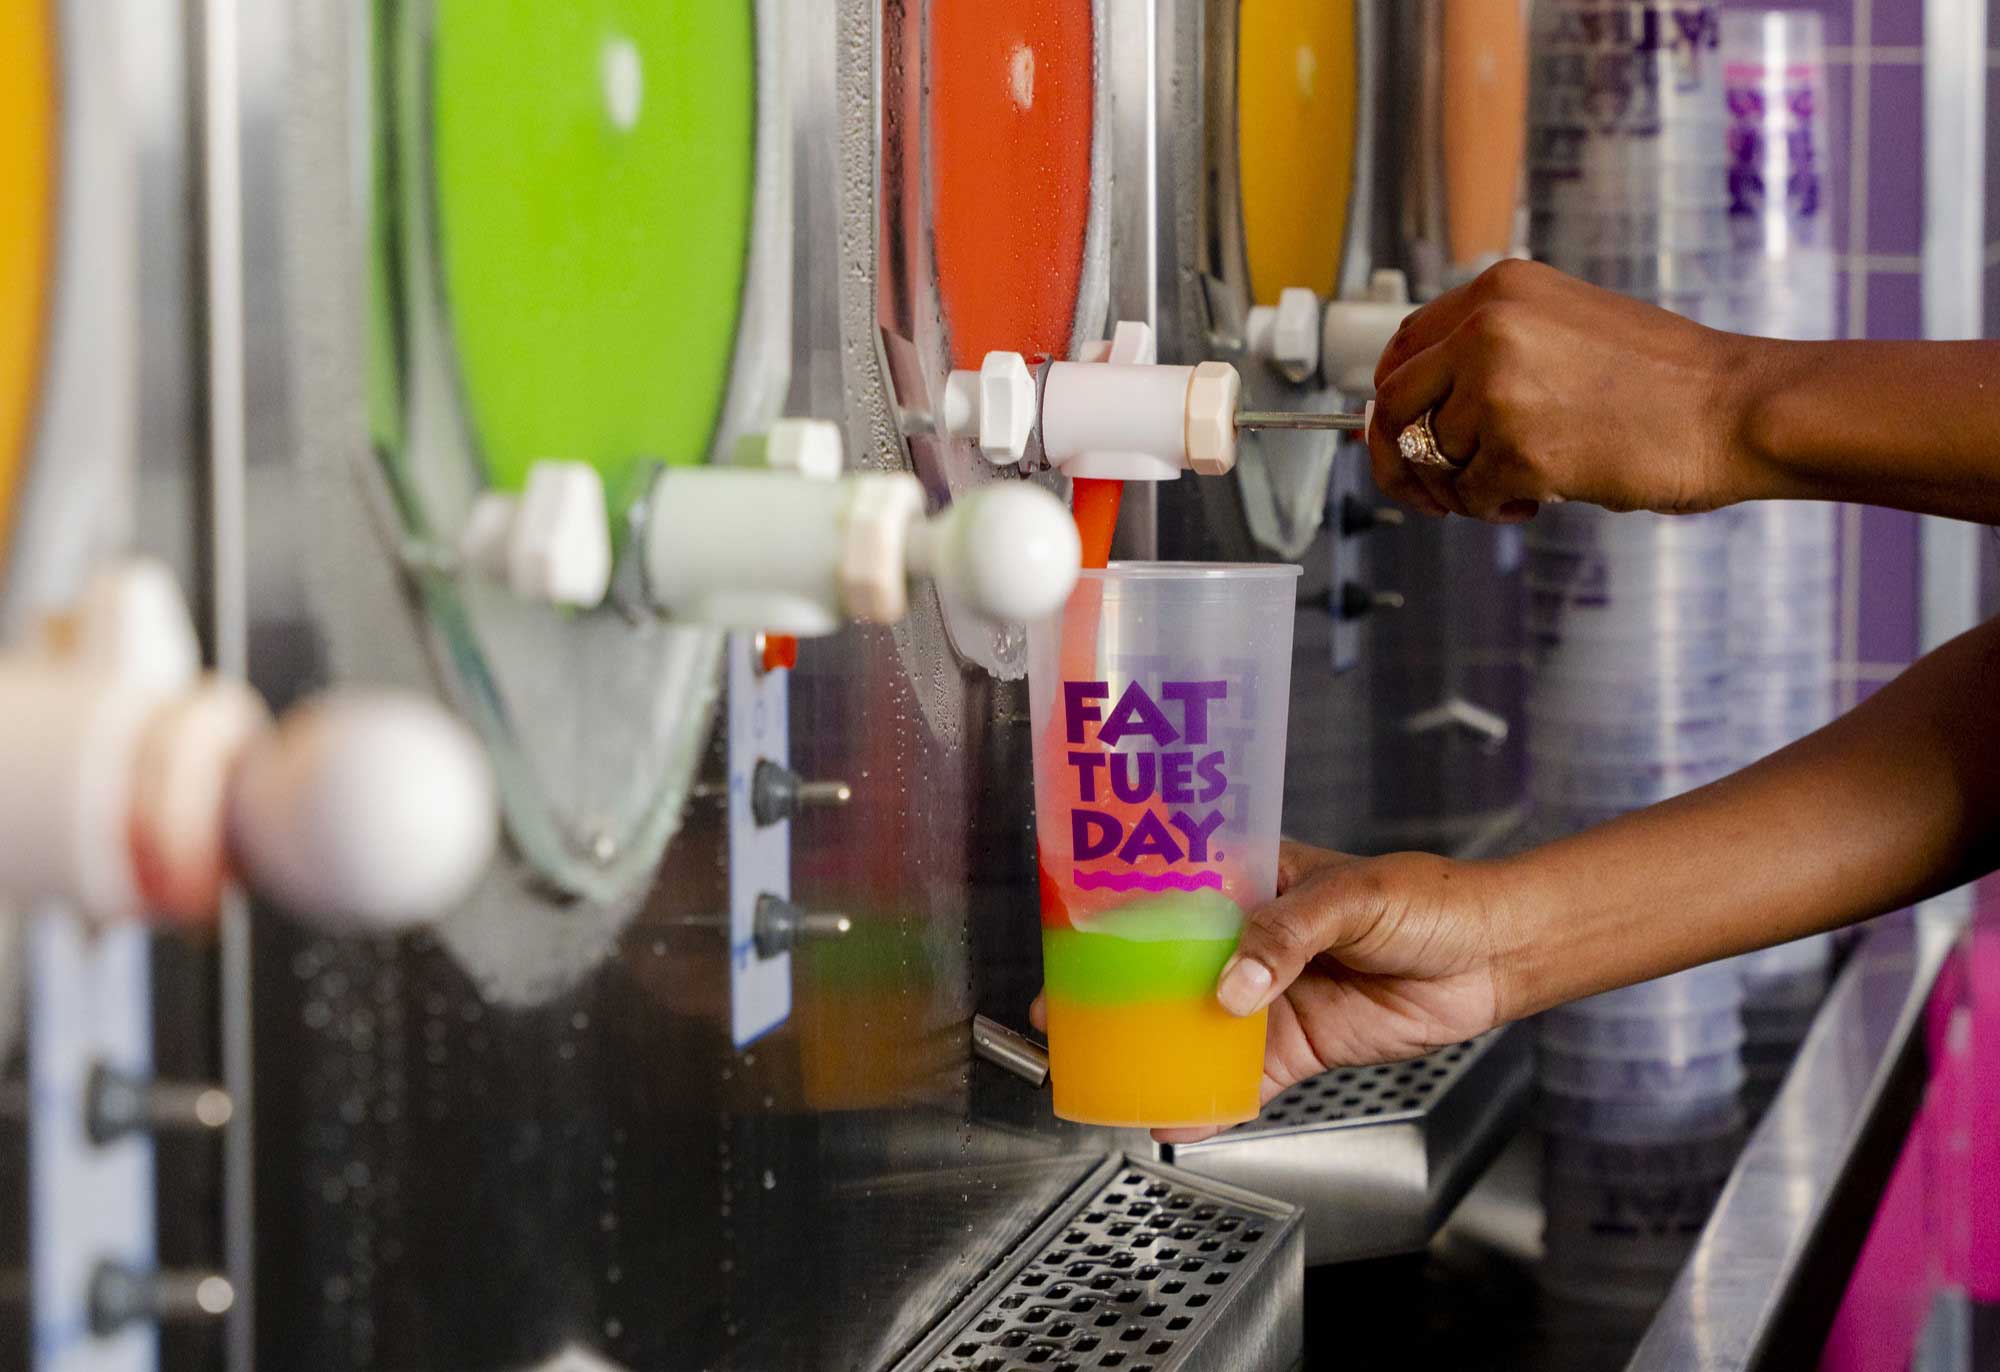 Fat Tuesday